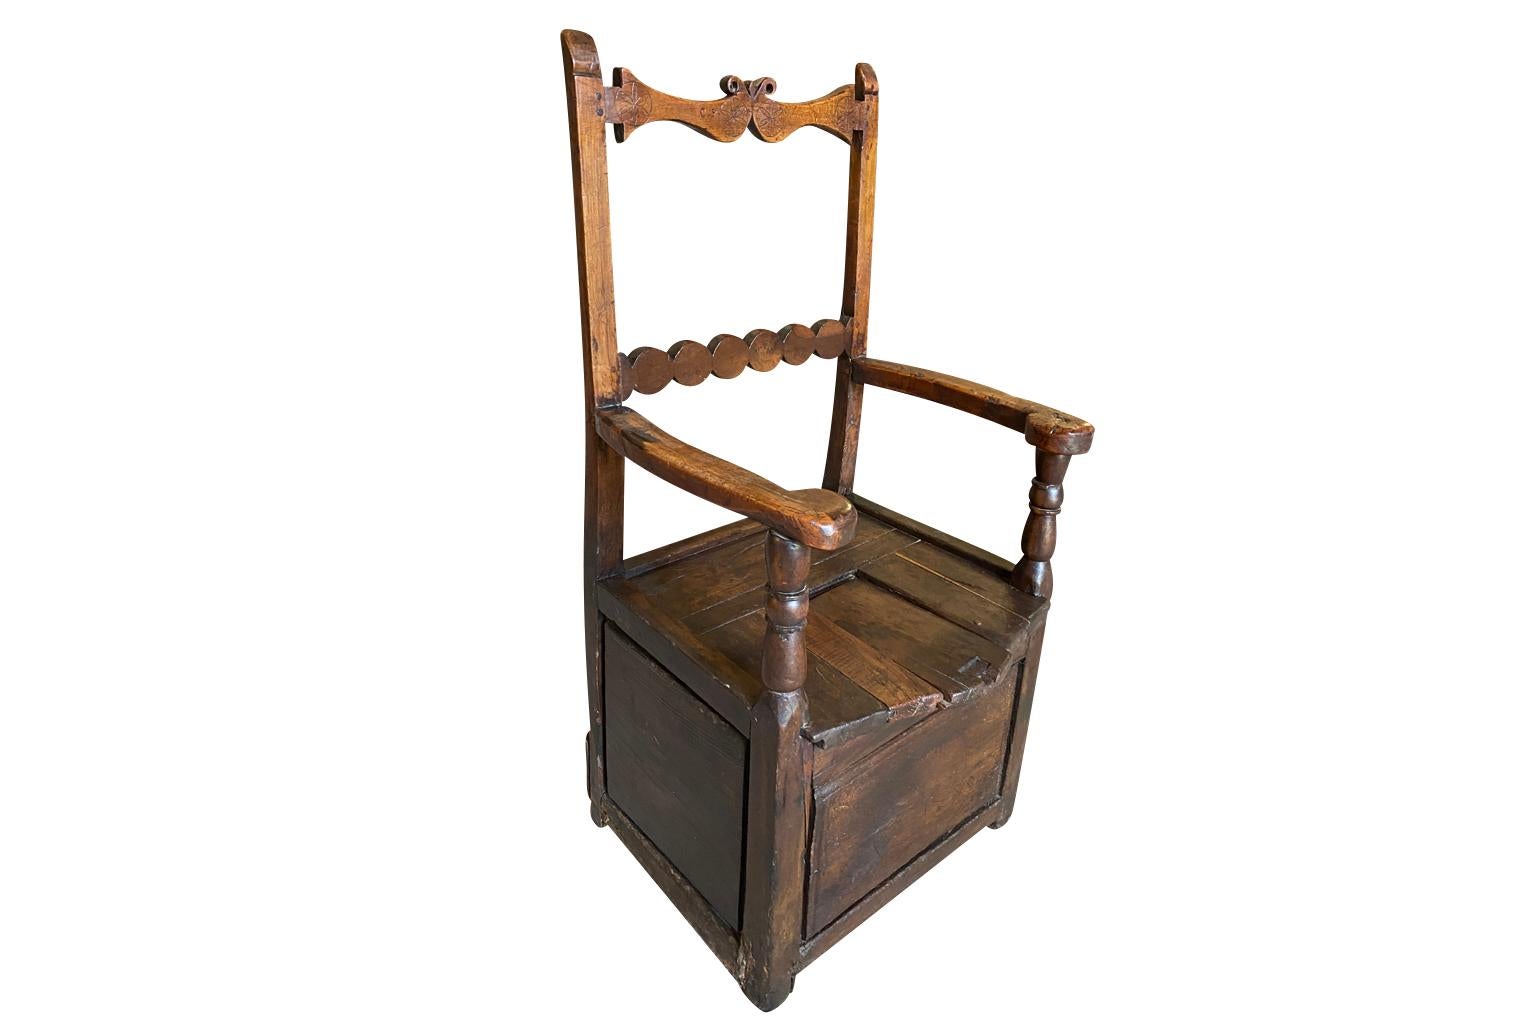 A delightful 18th century Arte Populaire Salt Box Chair from Auvergne, France.  Soundly constructed from richly stained oak with nicely carved back and a removable slat on the seat for the salt storage.  Super patina with great character.  The seat